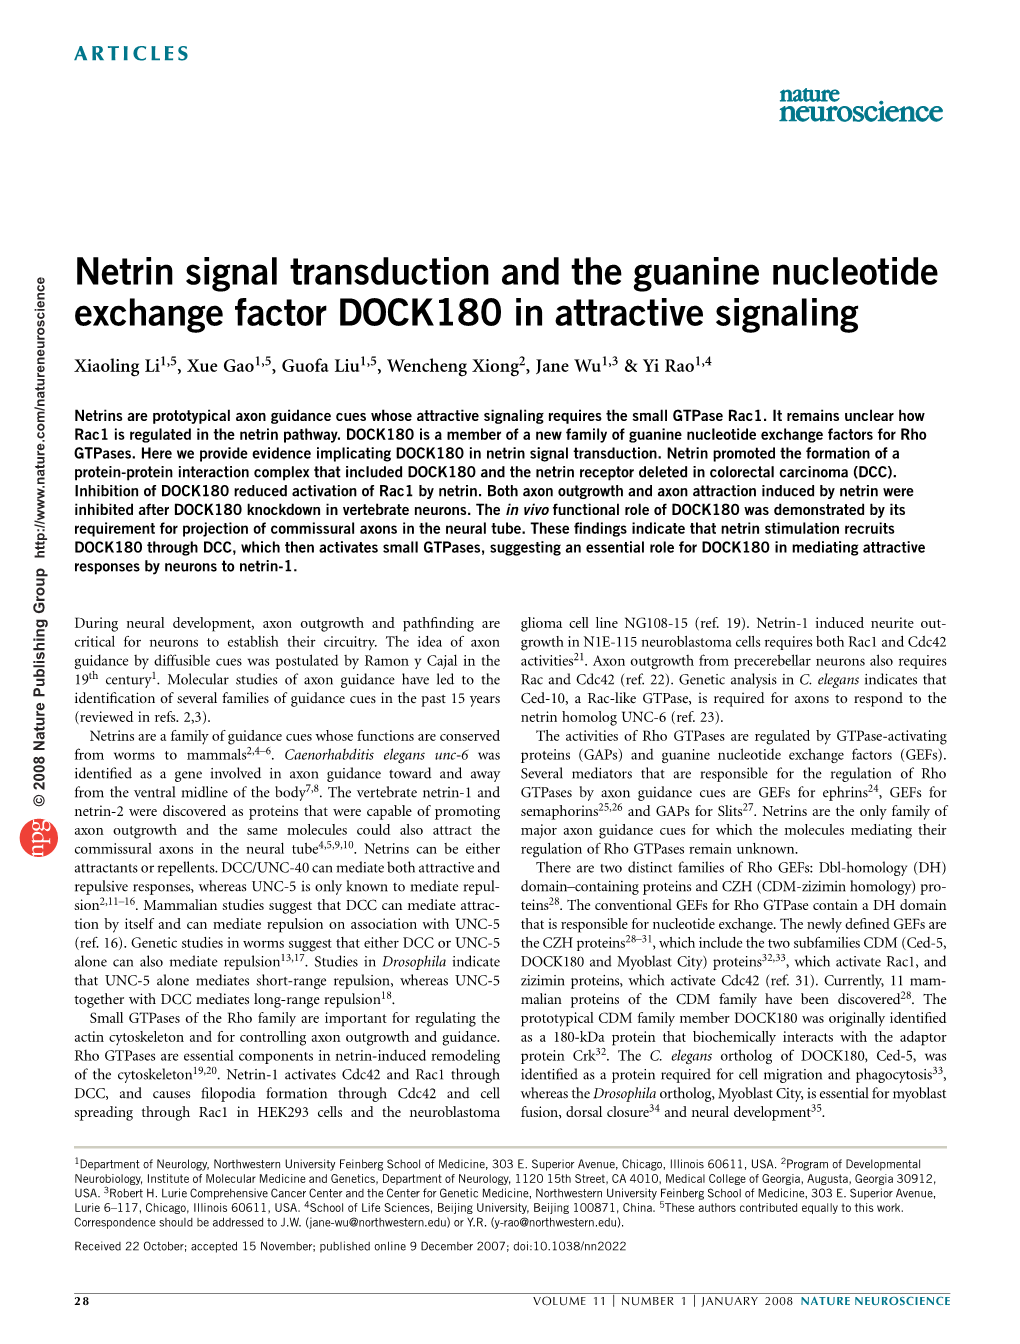 Netrin Signal Transduction and the Guanine Nucleotide Exchange Factor DOCK180 in Attractive Signaling